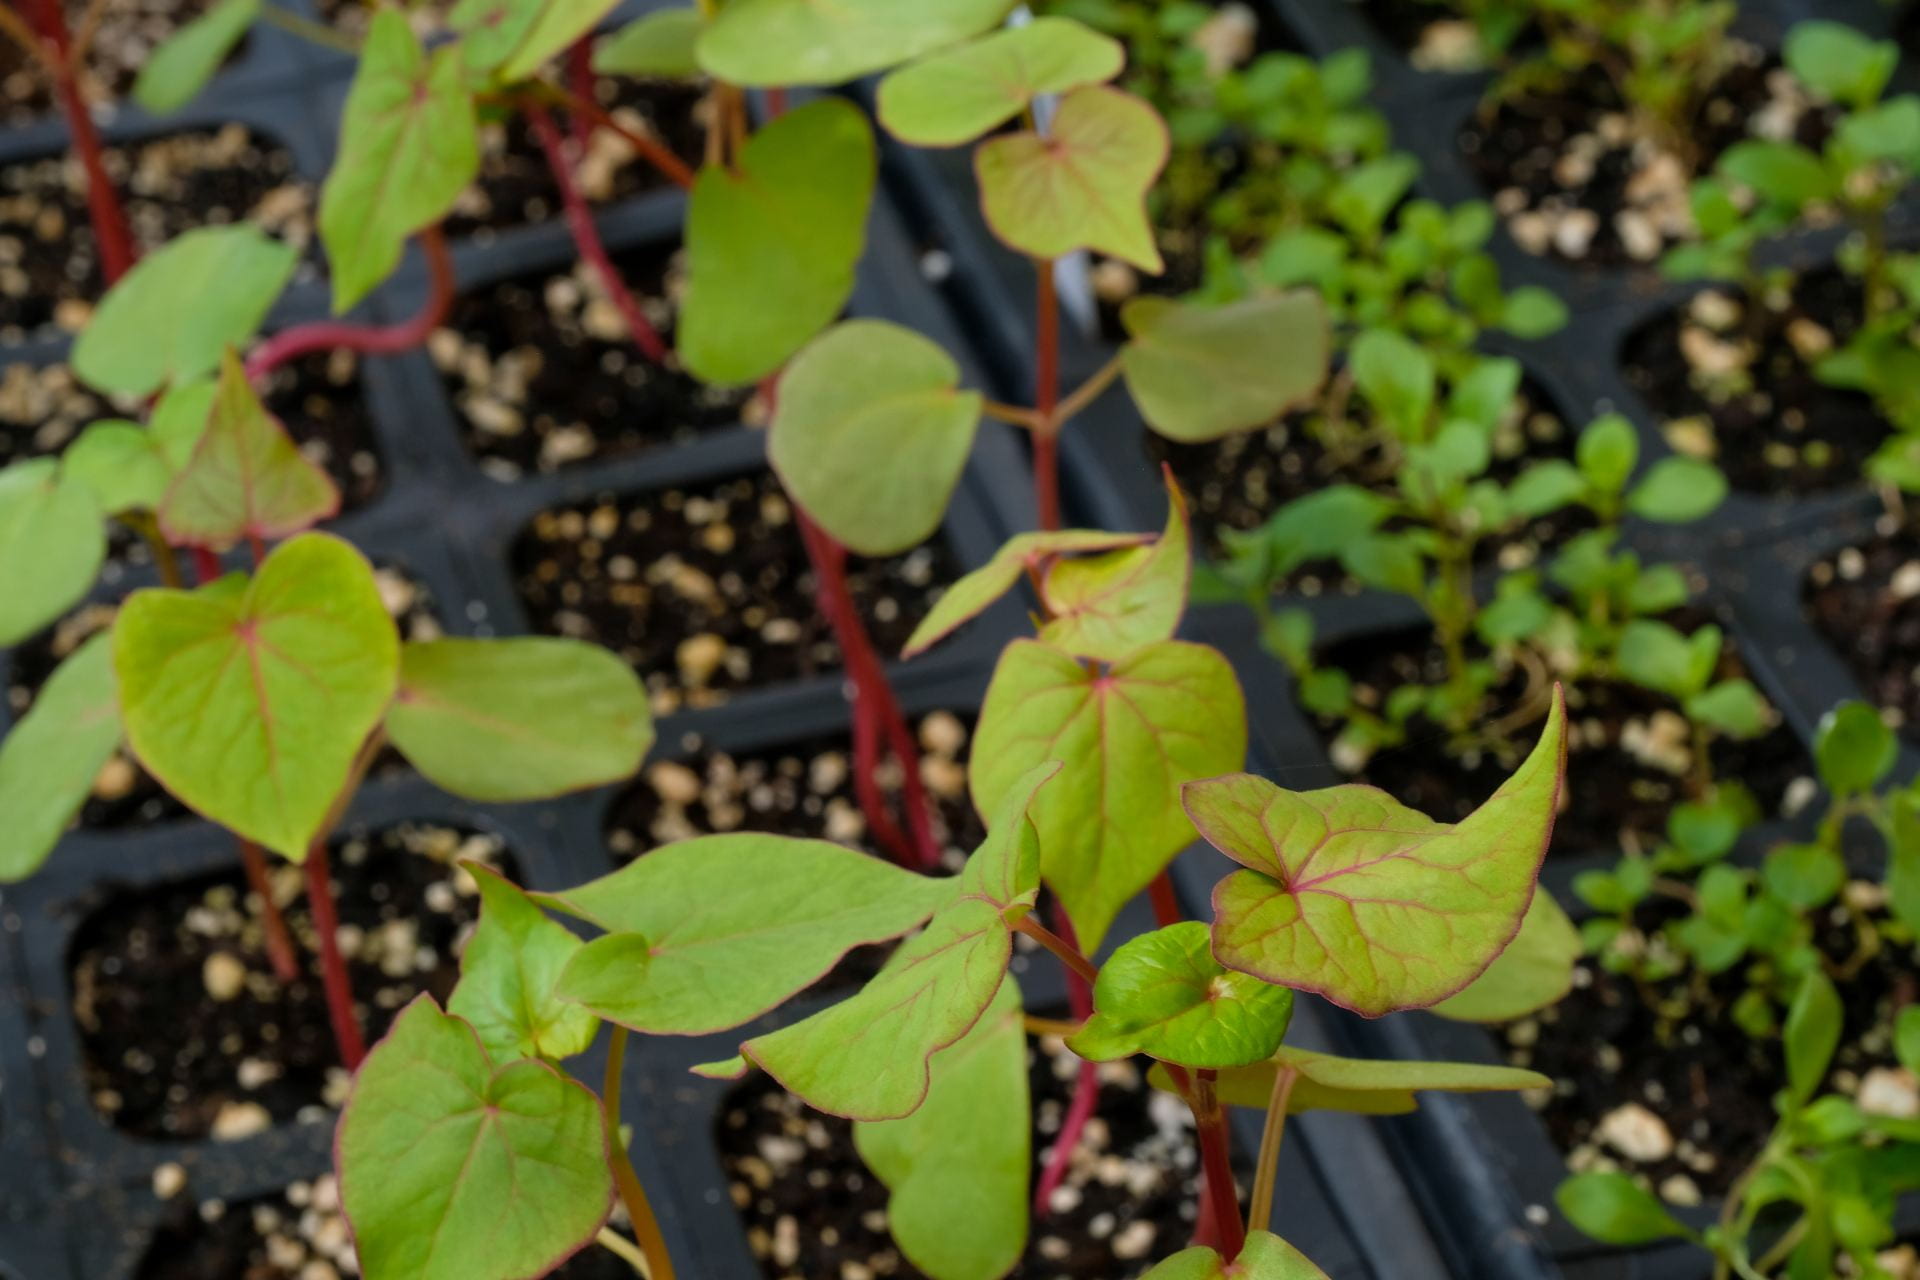 Takane Ruby Buckwheat growing inside the Lab Sciences Greenhouse at UW-Green Bay.